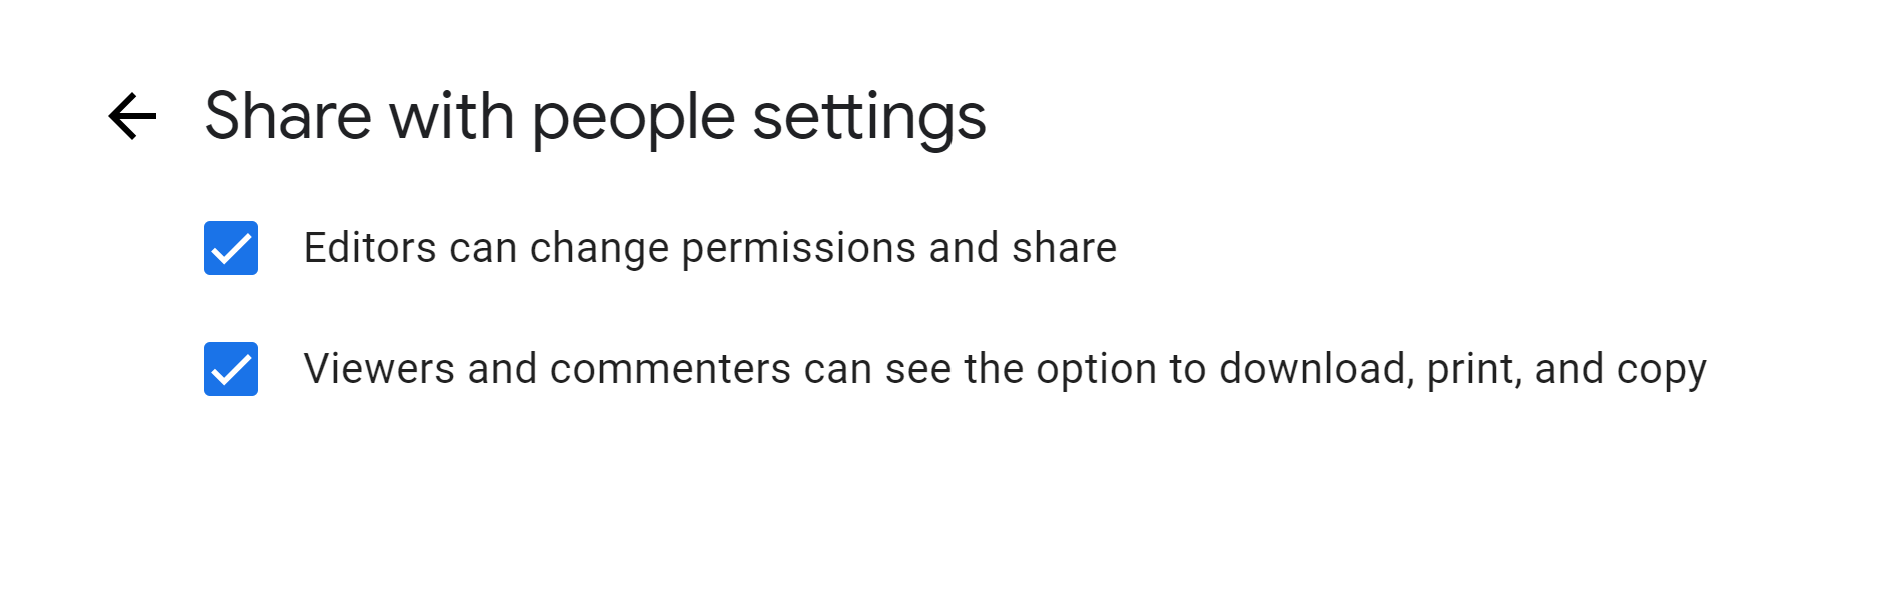 Advanced sharing settings in Google Drive under "Share with people settings"